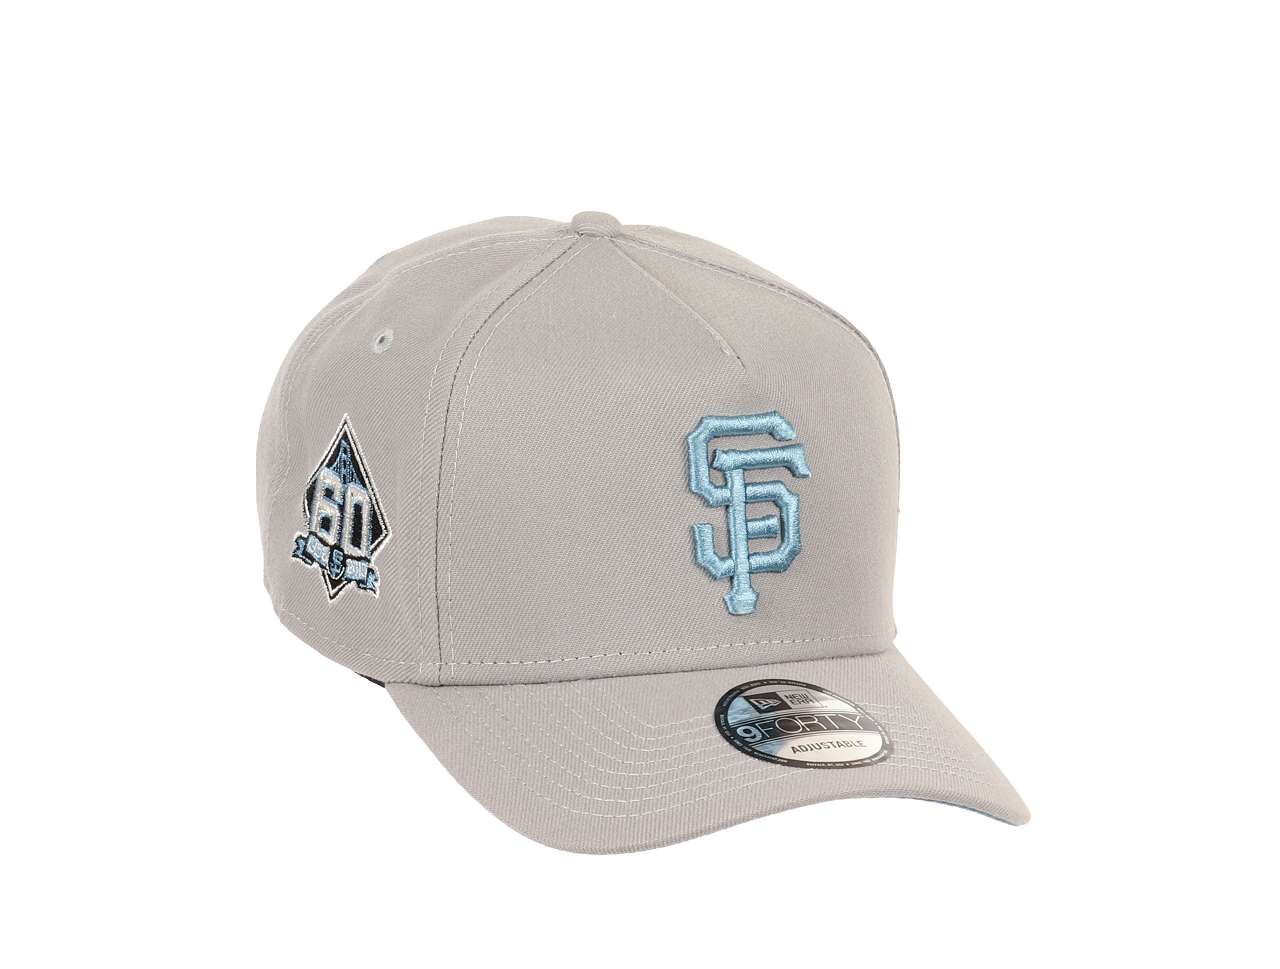 San Francisco Giants MLB  60th Anniversary Sidepatch Cooperstown Gray Sky 9Forty A-Frame Snapback Cap New Era